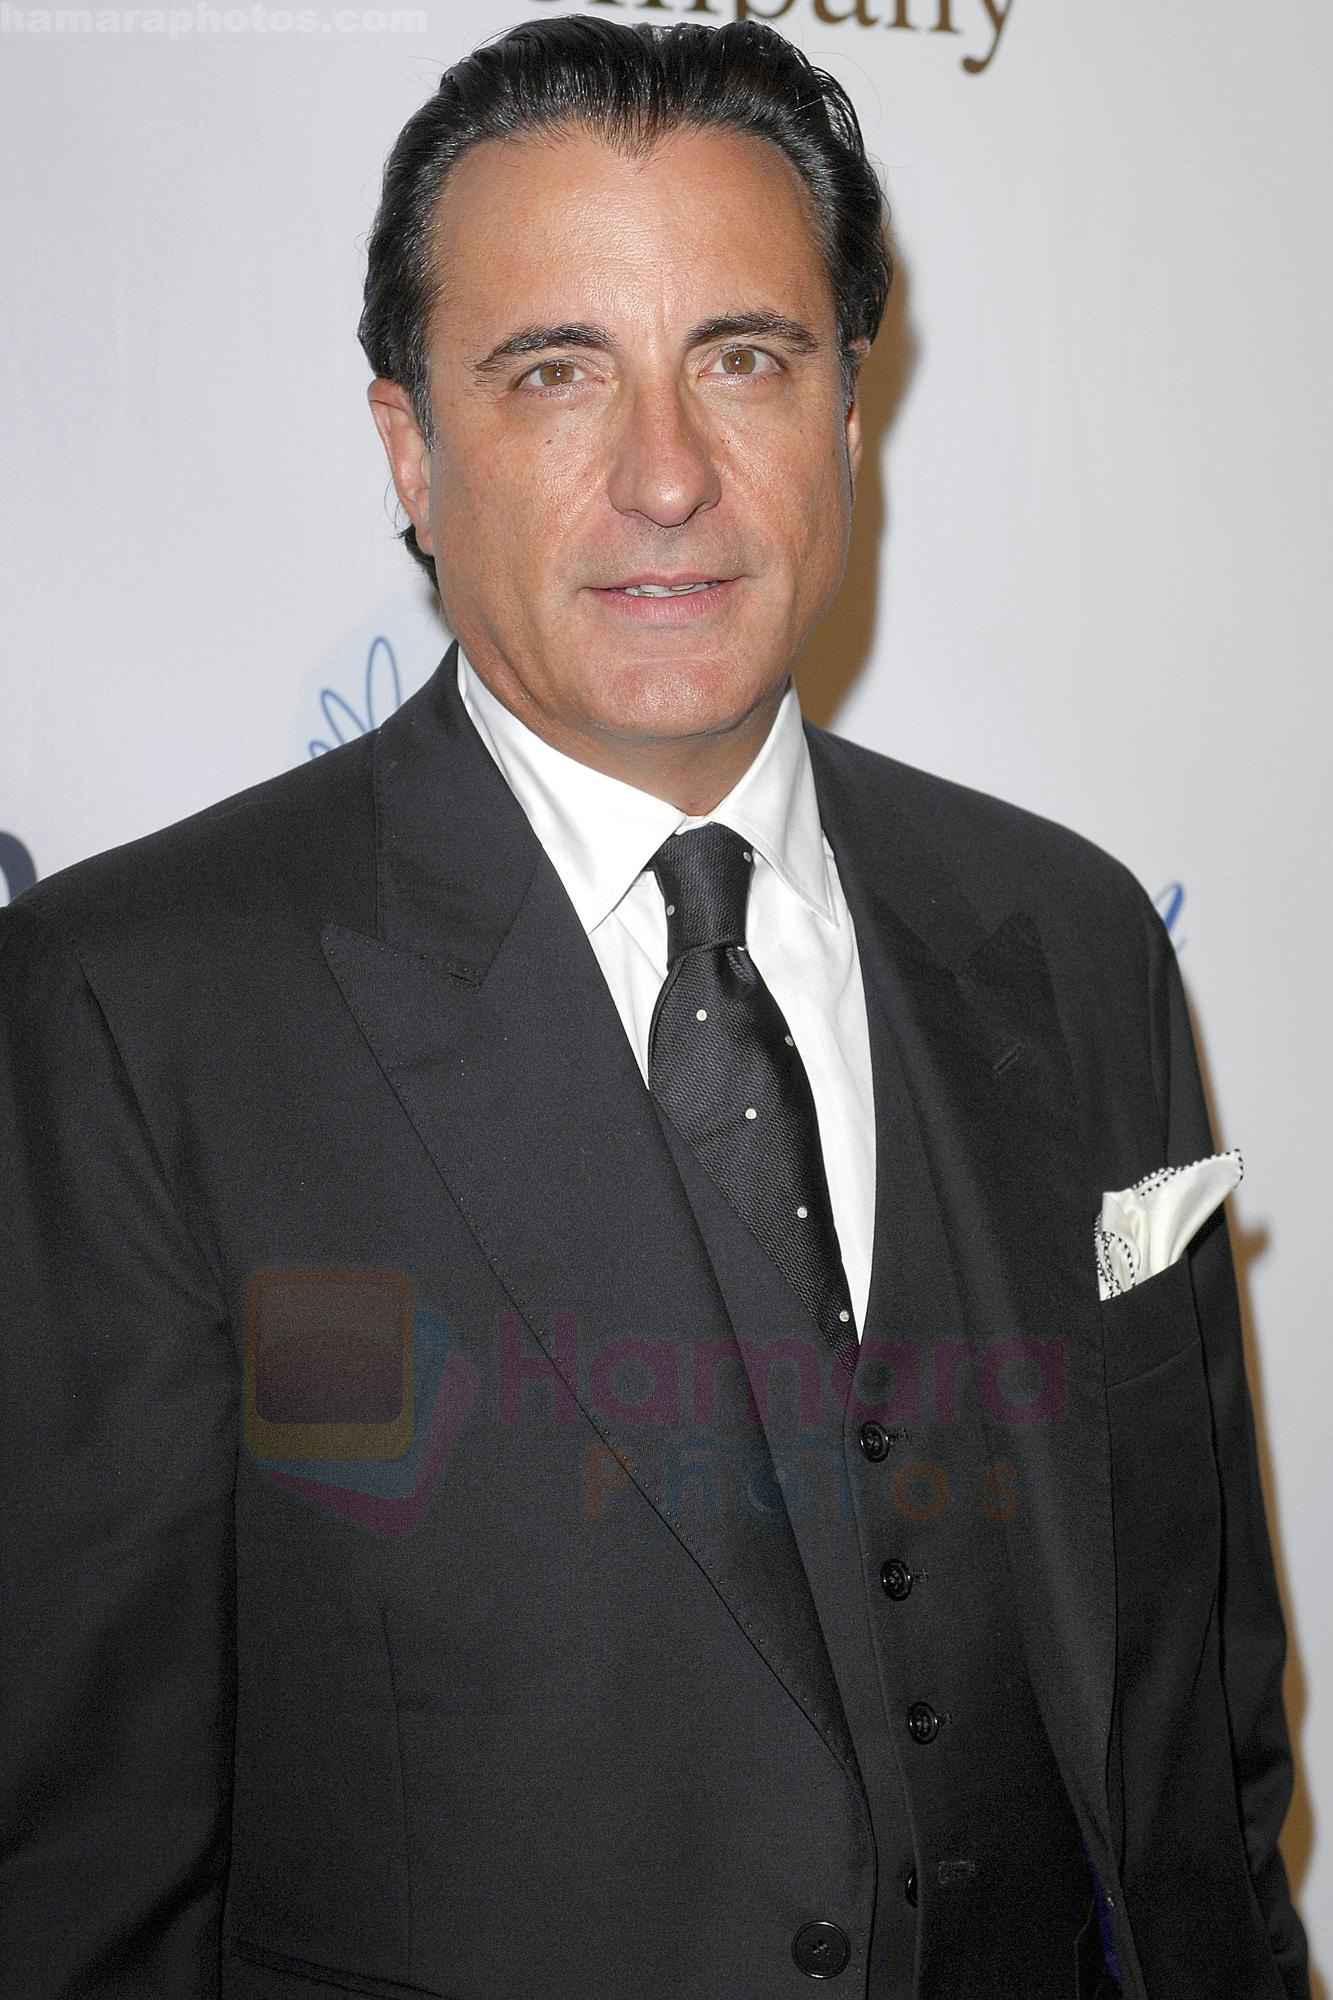 Andy Garcia at the 24th Annual Imagen Awards held at the Beverly Hilton Hotel Los Angeles, California on 21.08.09 - IANS-WENN